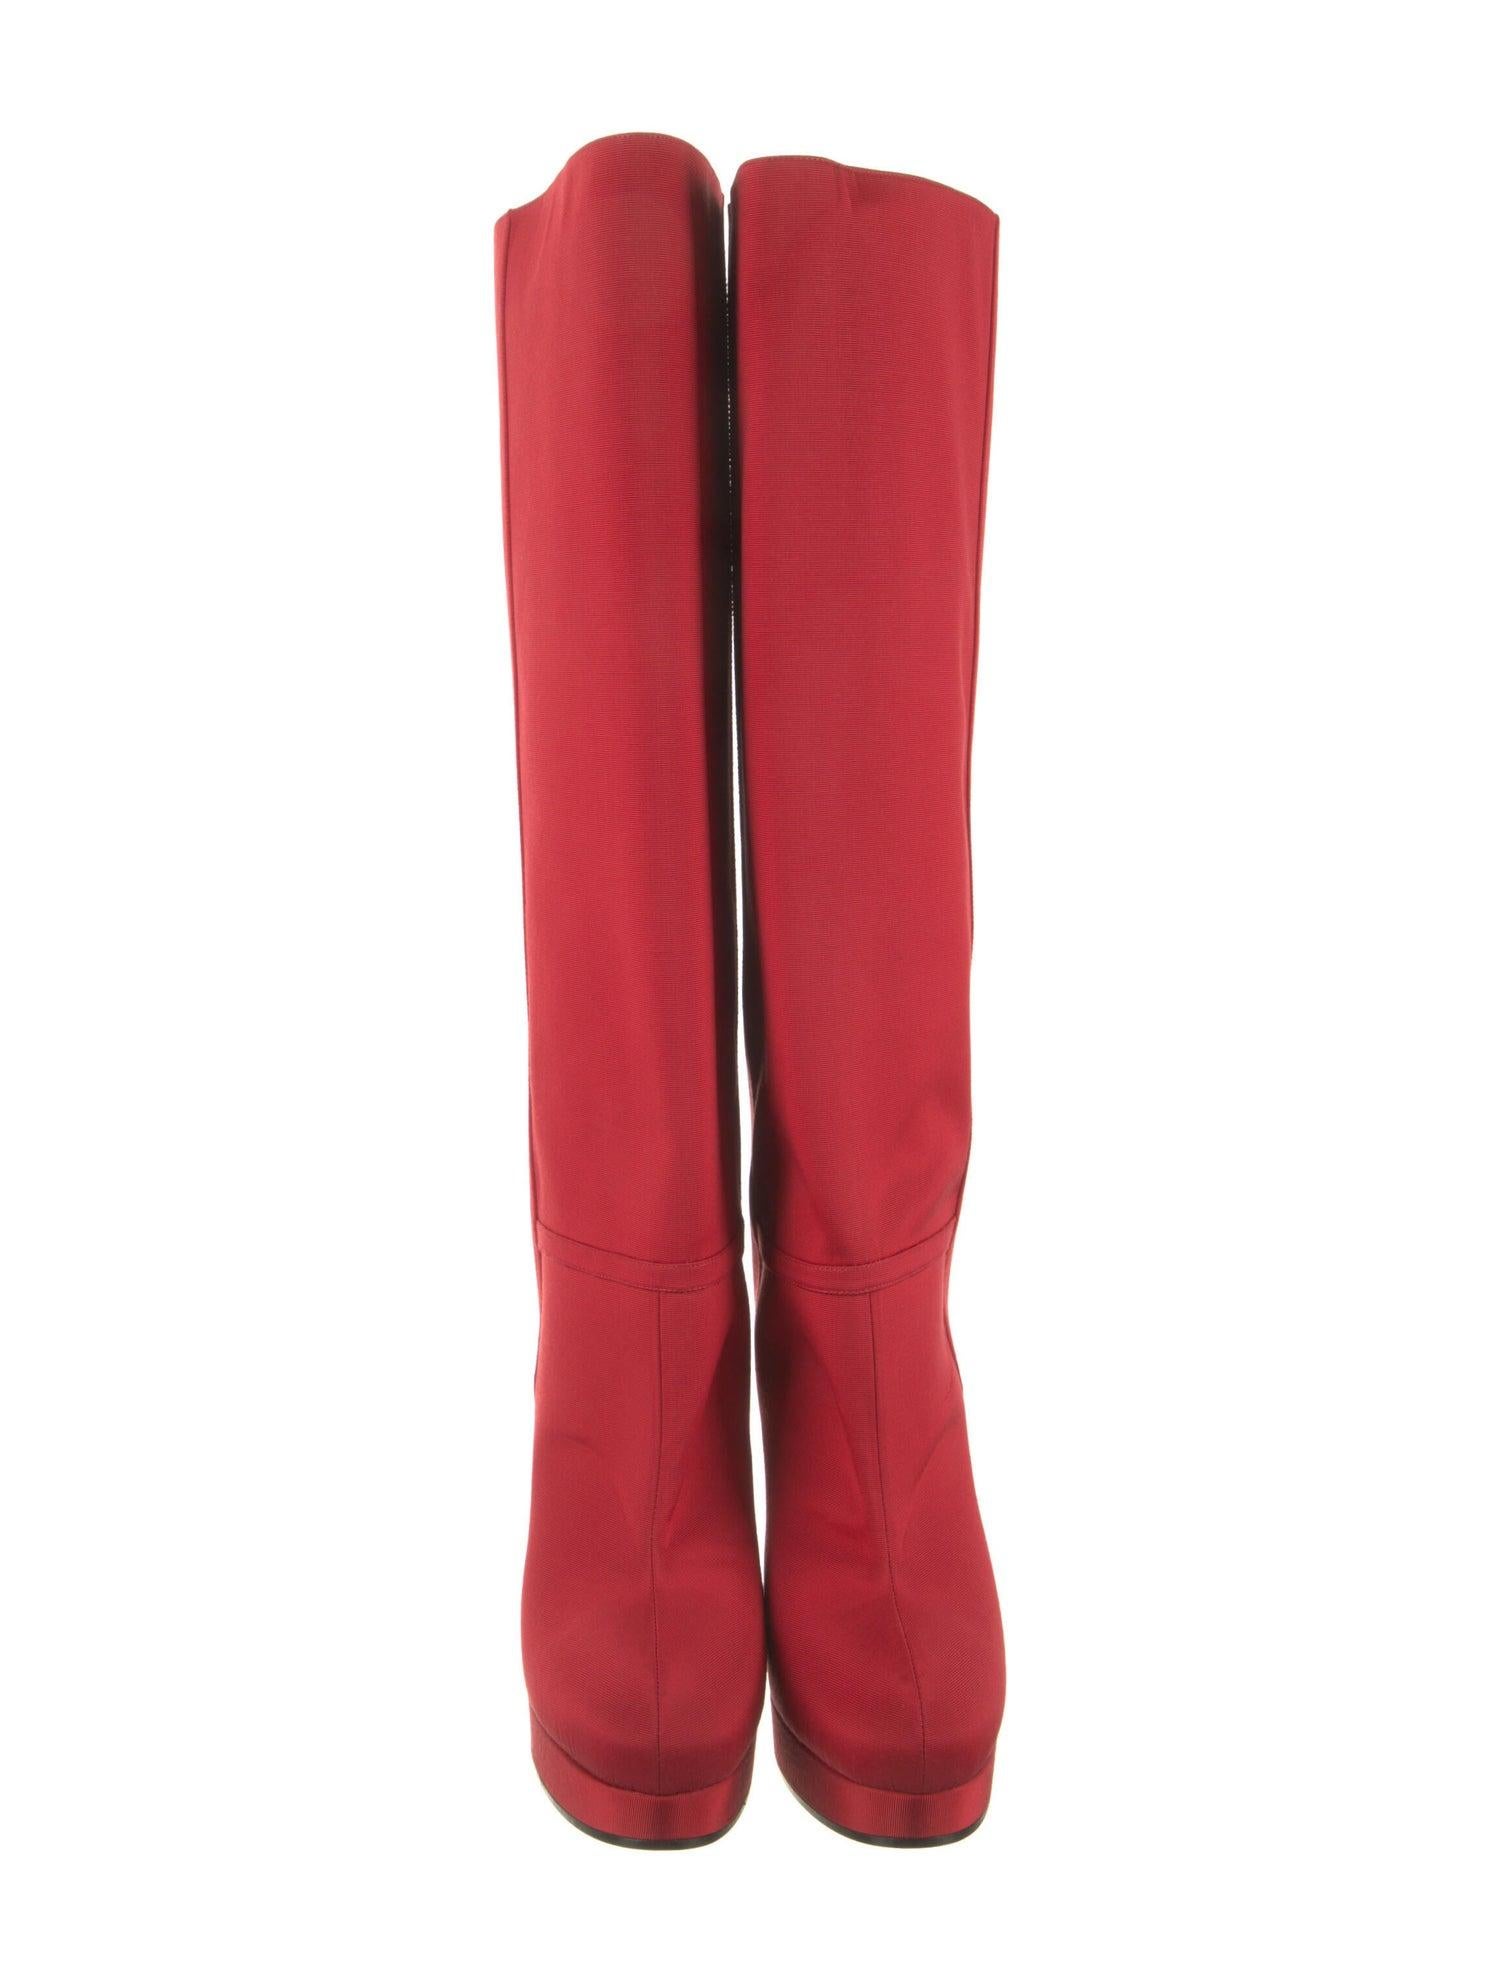 New With Box Gucci Fall 2019 Alessandro Michele Red Boots Sz 38.5 For Sale 7